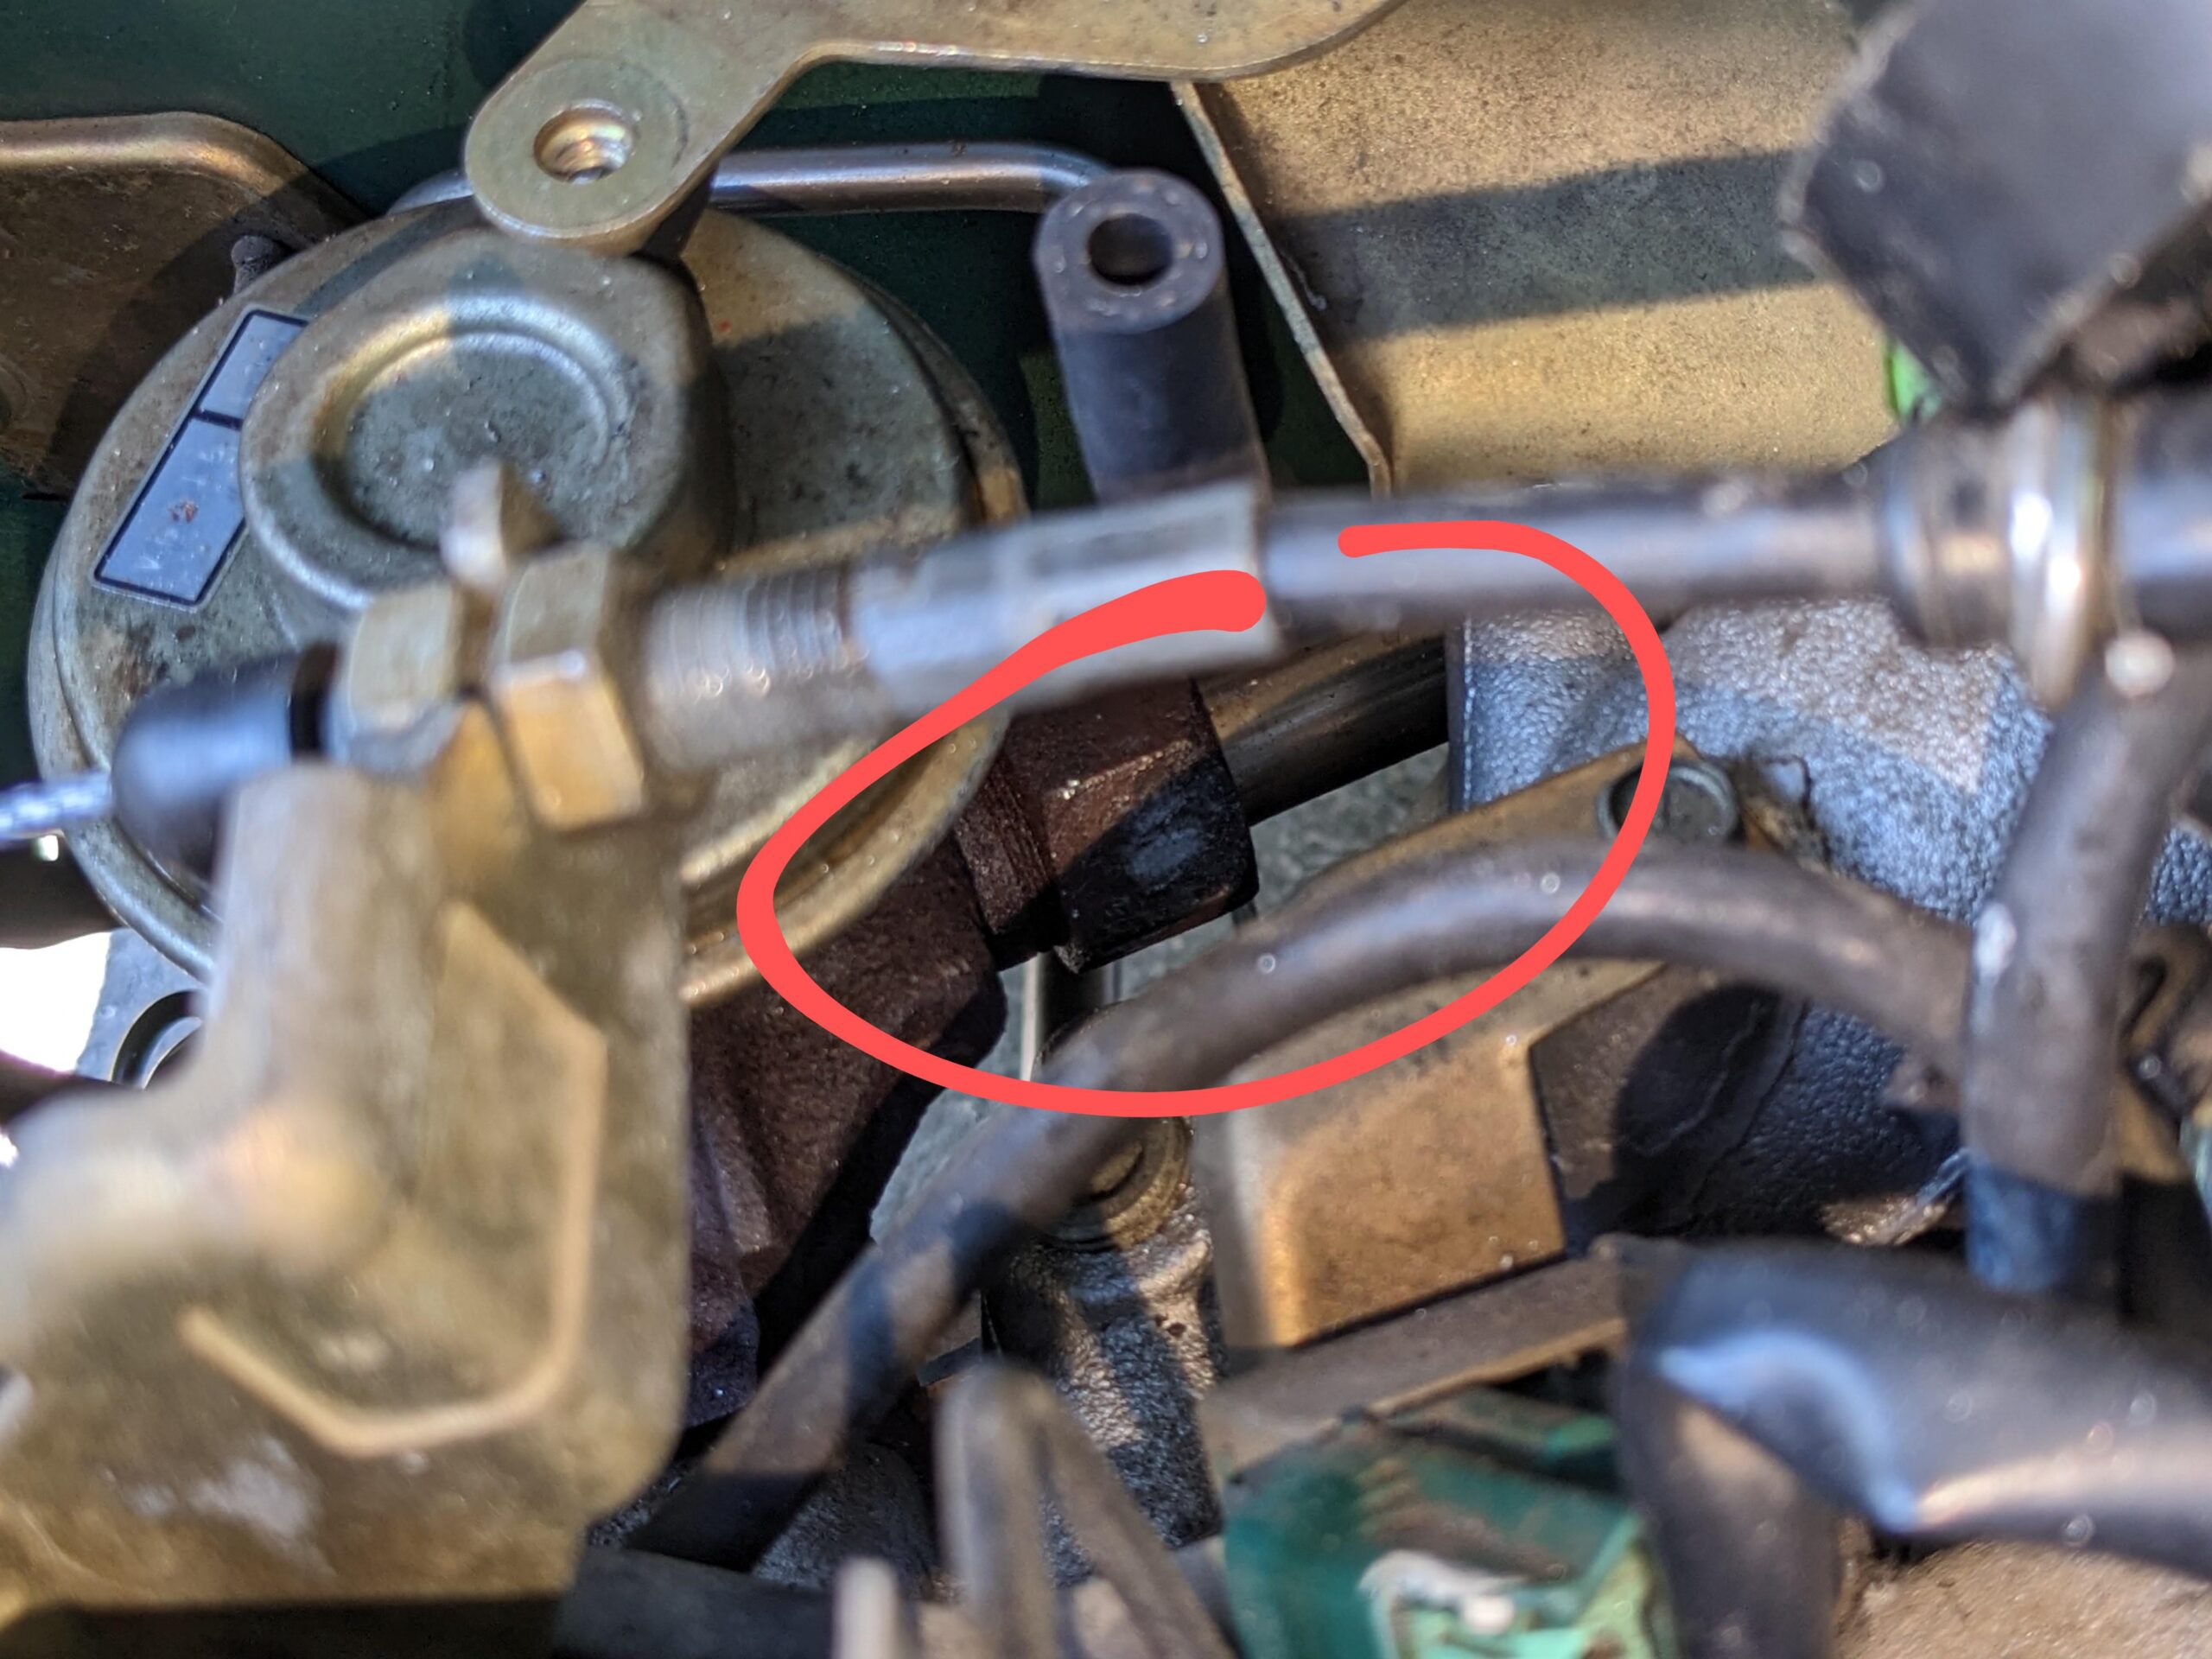 Troubleshooting Nissan Code P0400: EGR System Malfunction